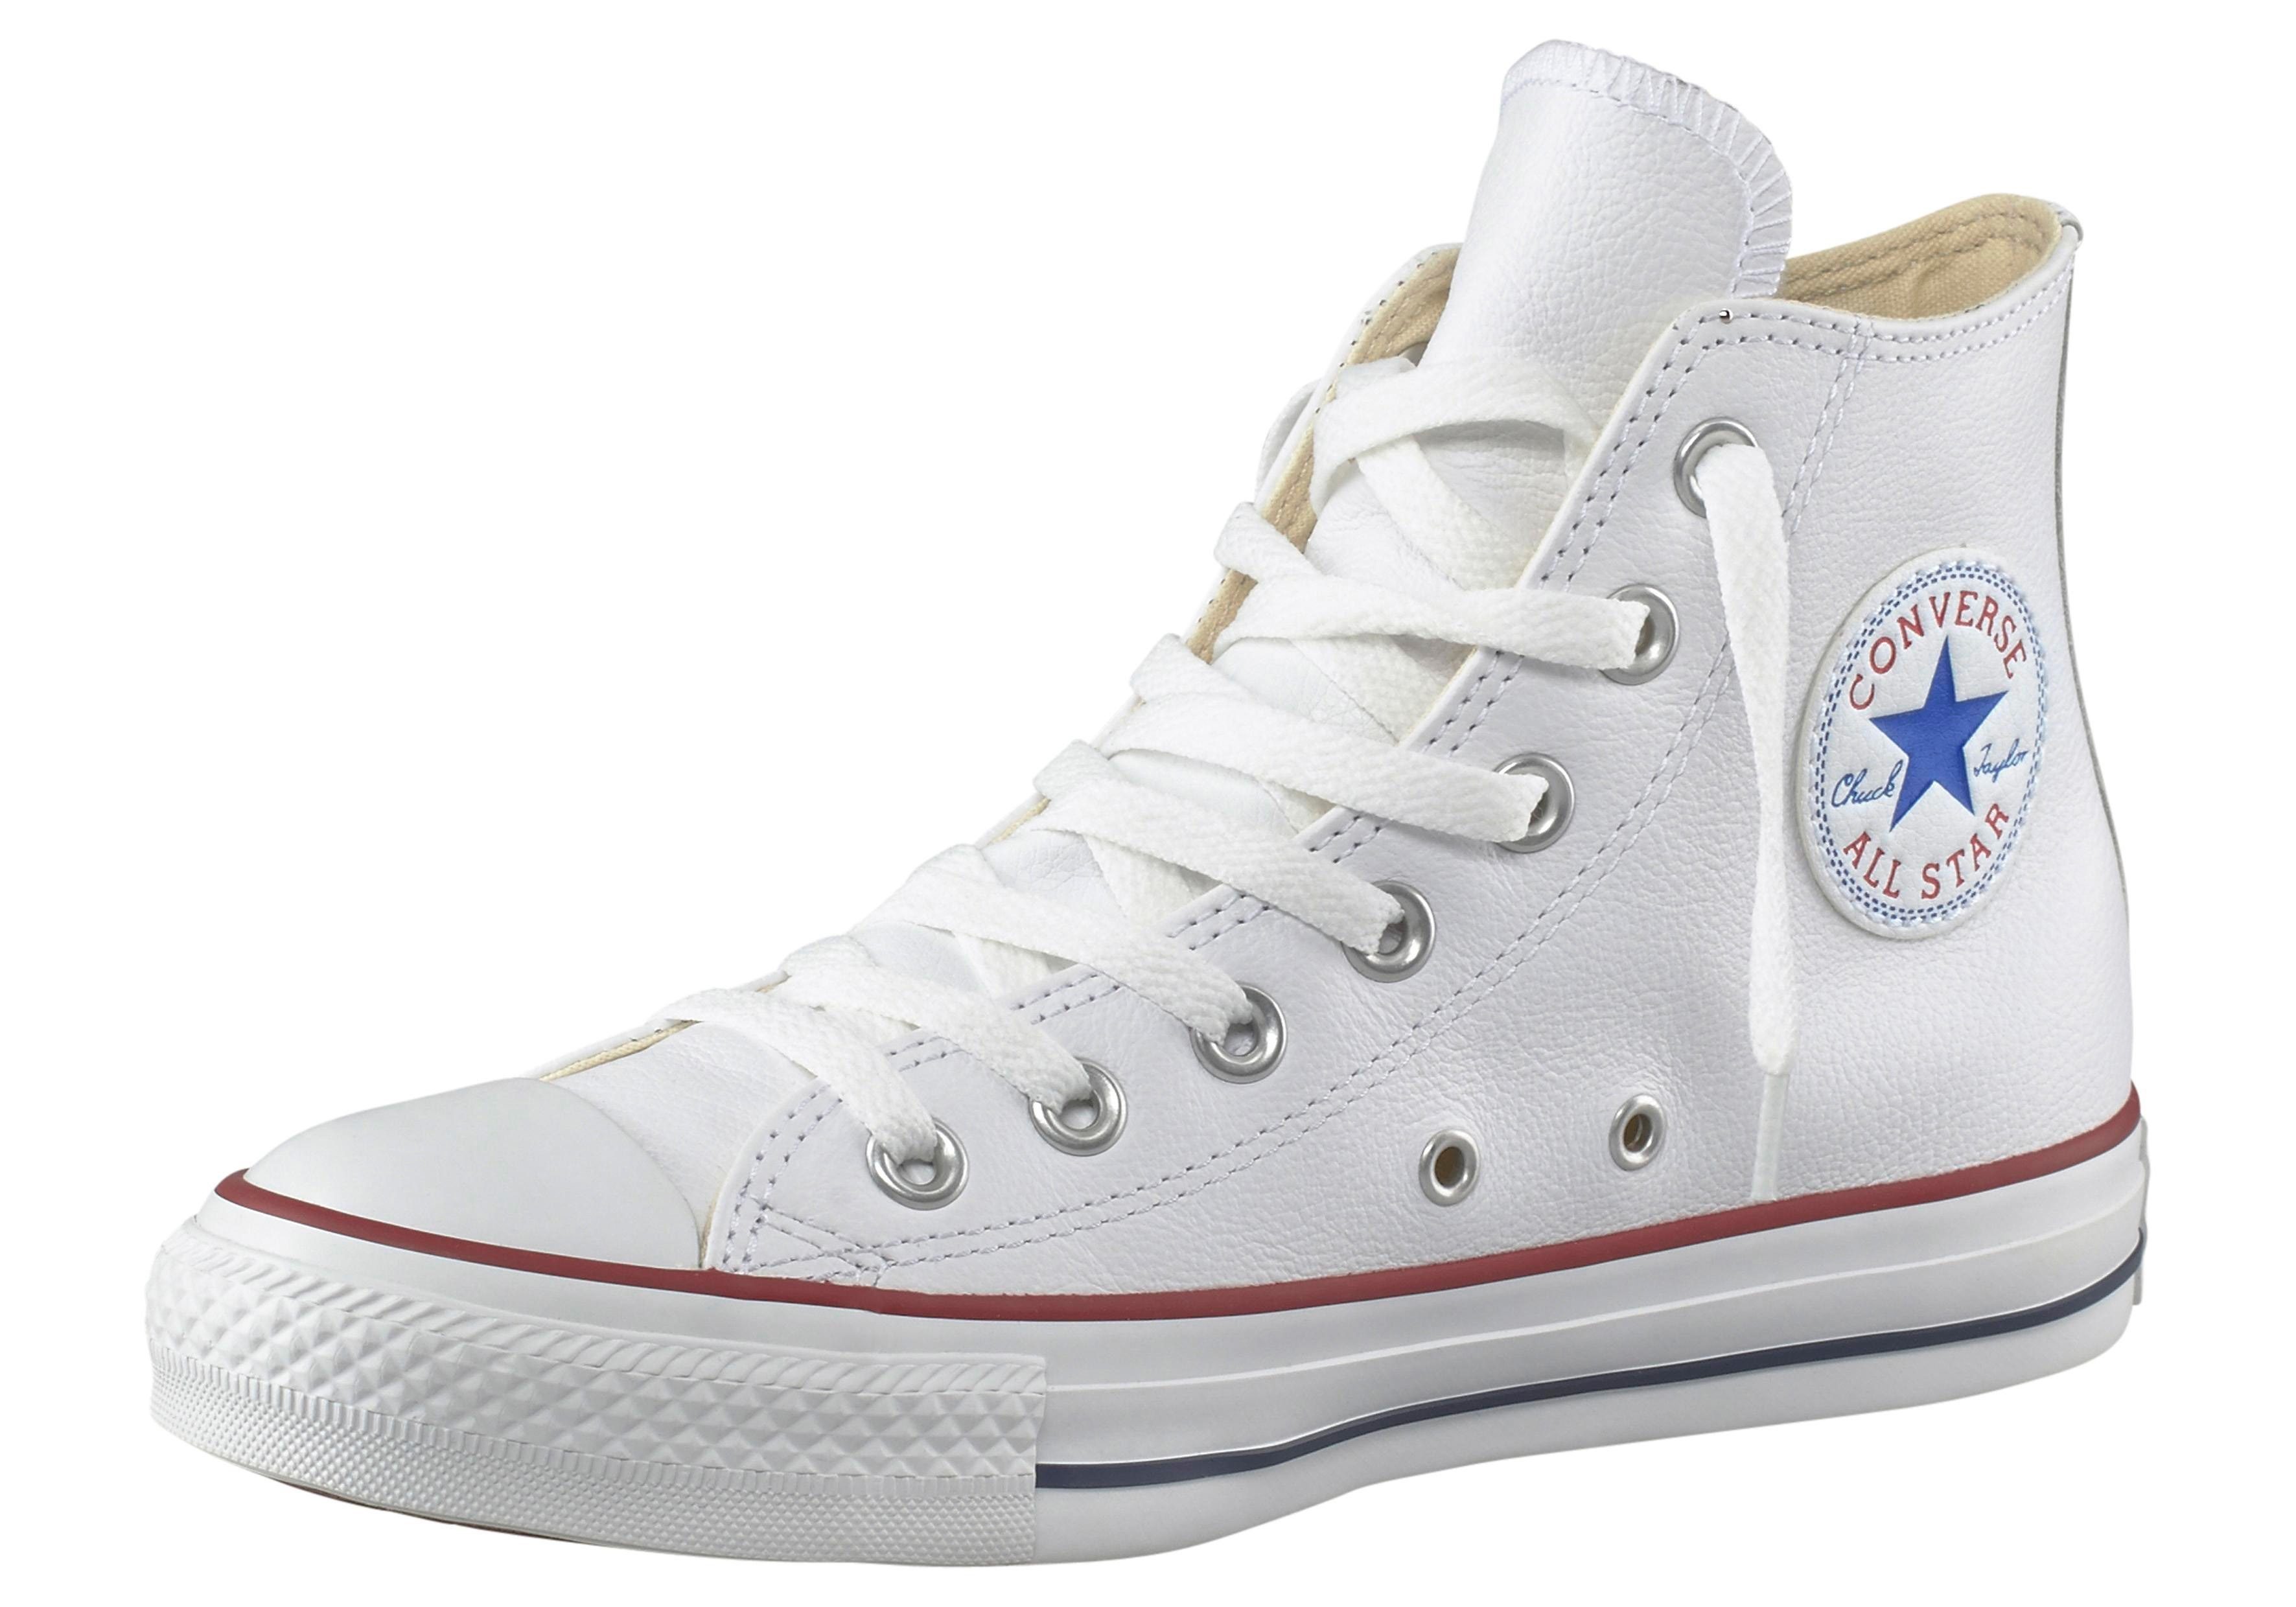 Converse Chuck Taylor All Star Leather Sneaker